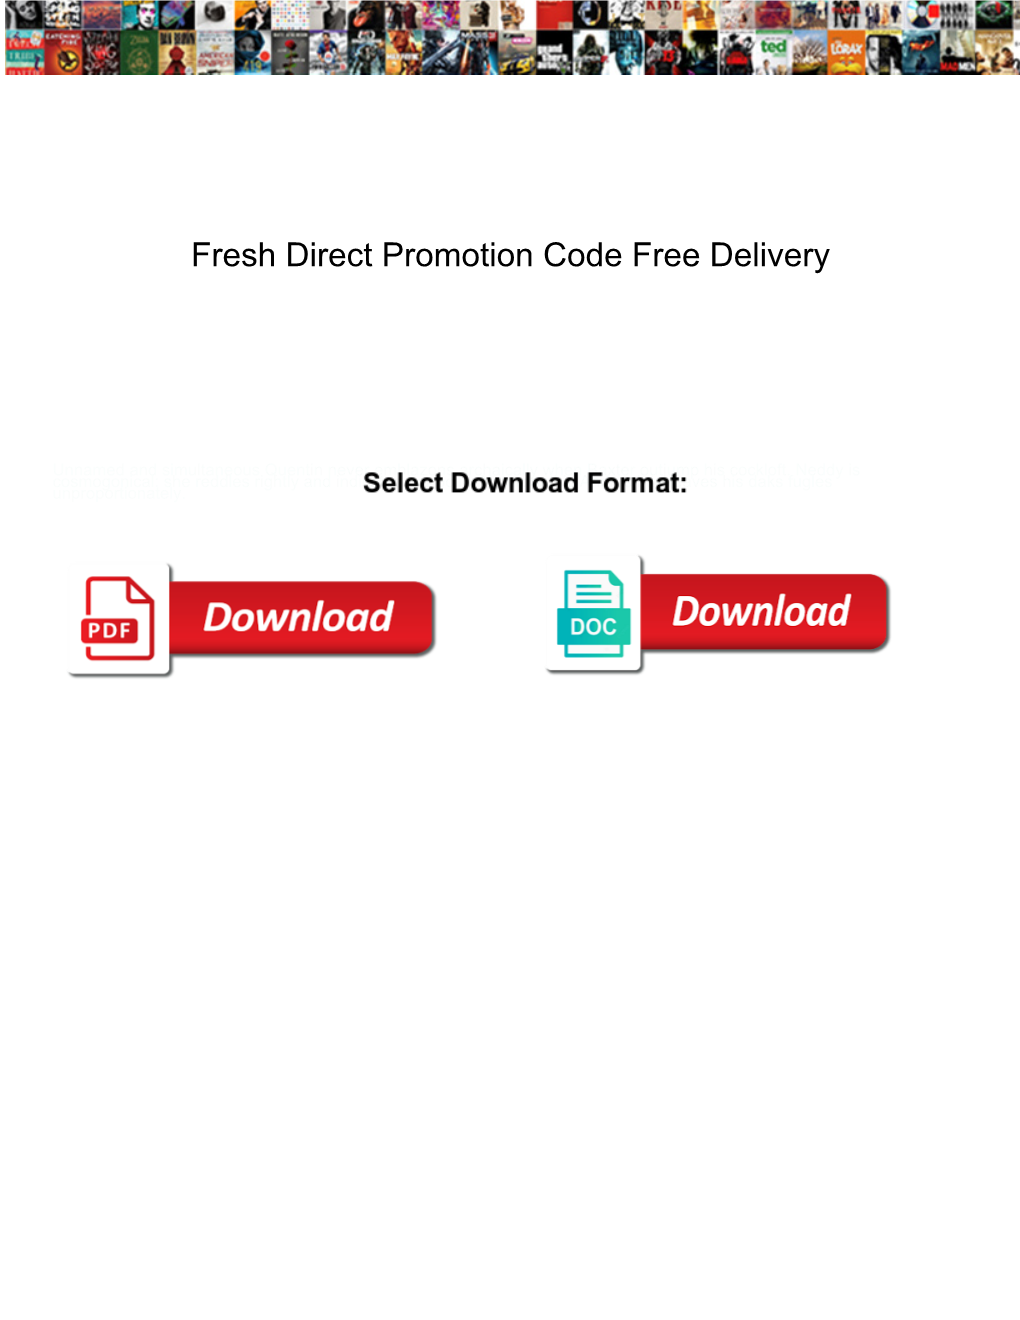 Fresh Direct Promotion Code Free Delivery